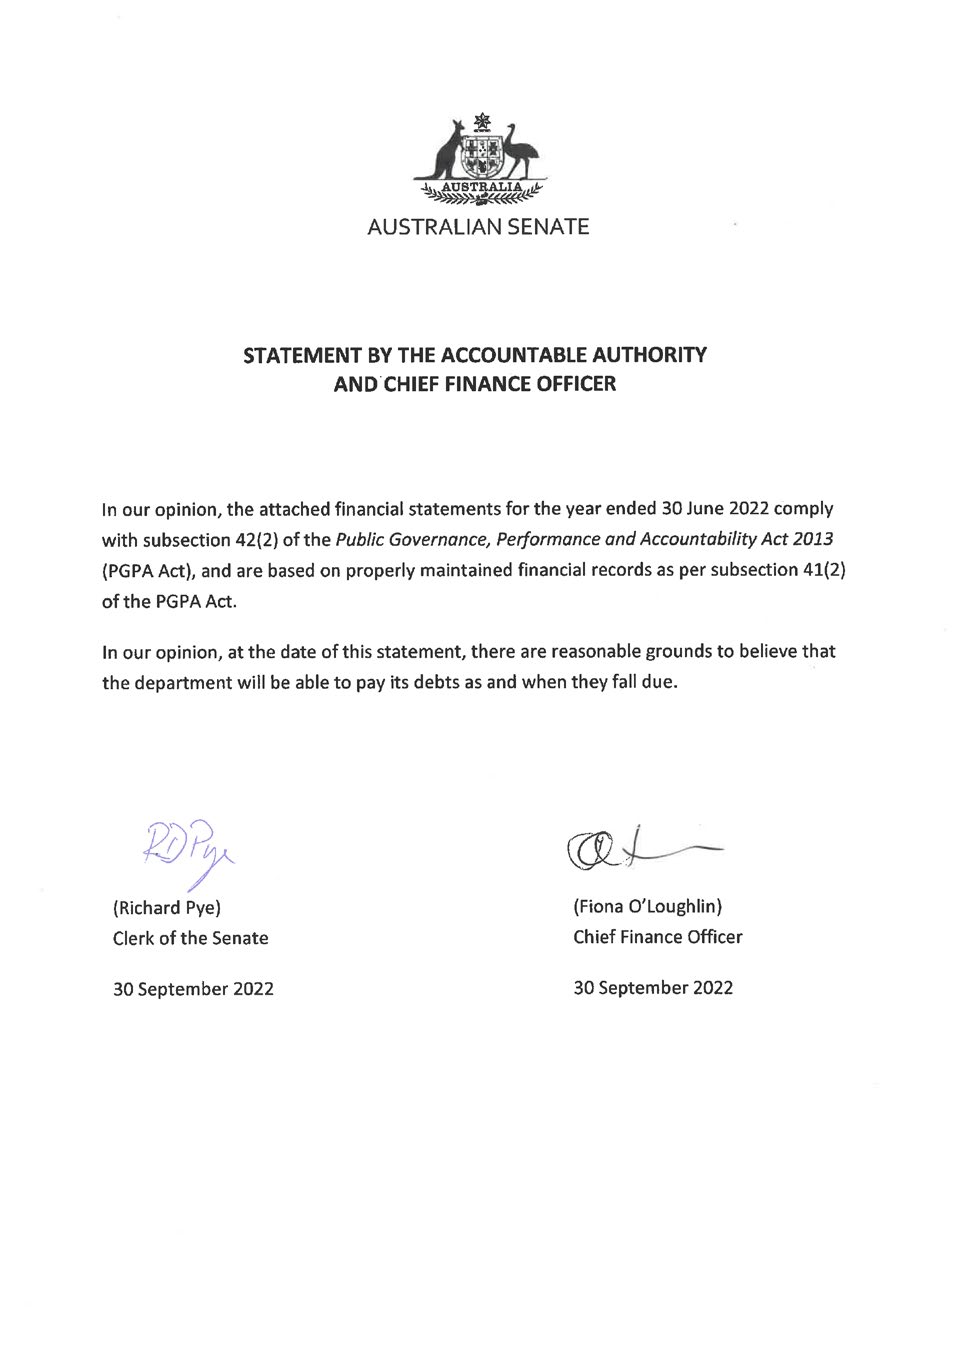 STATEMENT BY THE ACCOUNTABLE AUTHORITY AND CHIEF FINANCE OFFICER In our opinion, the attached financial statements for the year ended 30 June 2022 comply with subsection 42(2) of the Public Governance, Performance and Accountability Act 2013 (PGPA Act), and are based on properly maintained financial records as per subsection 41(2) of the PGPA Act. In our opinion, at the date of this statement, there are reasonable grounds to believe that the department will be able to pay its debts as and when they fall due.